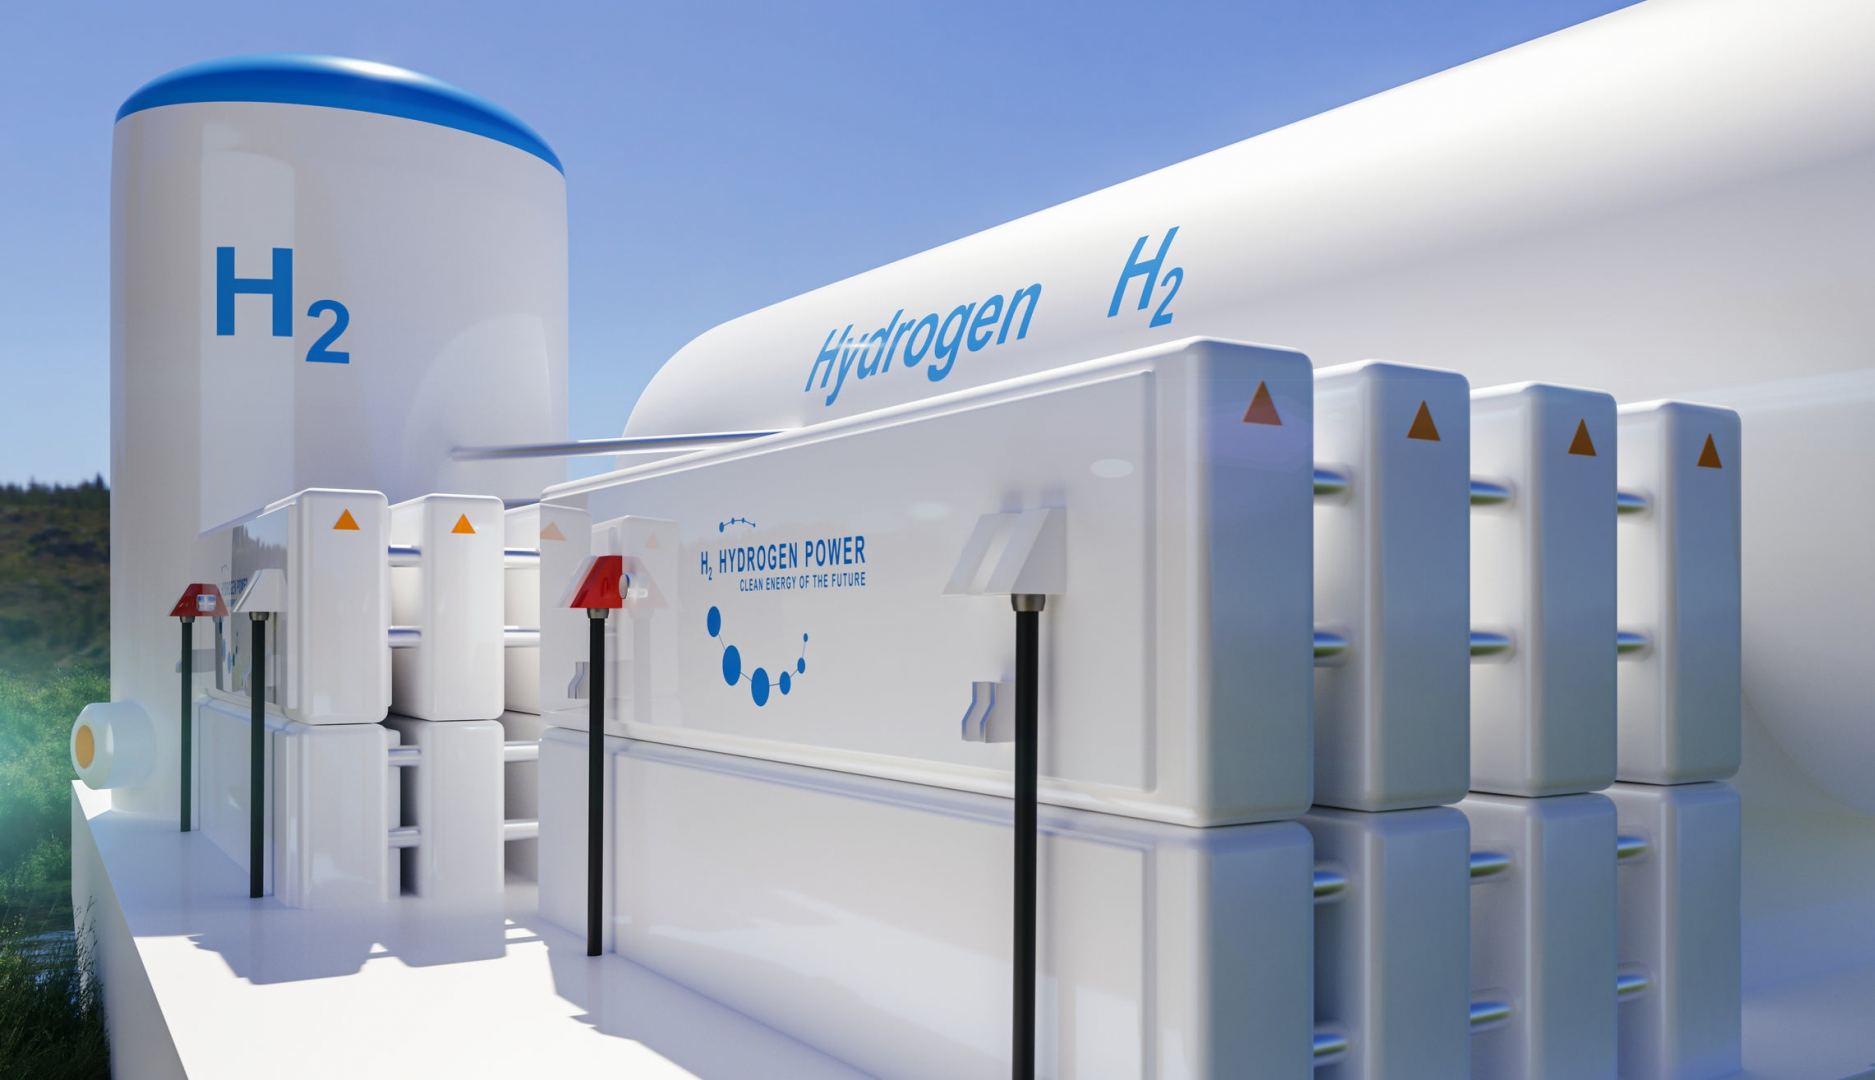 Introducing hydrogen as energy carrier can raise energy security risks